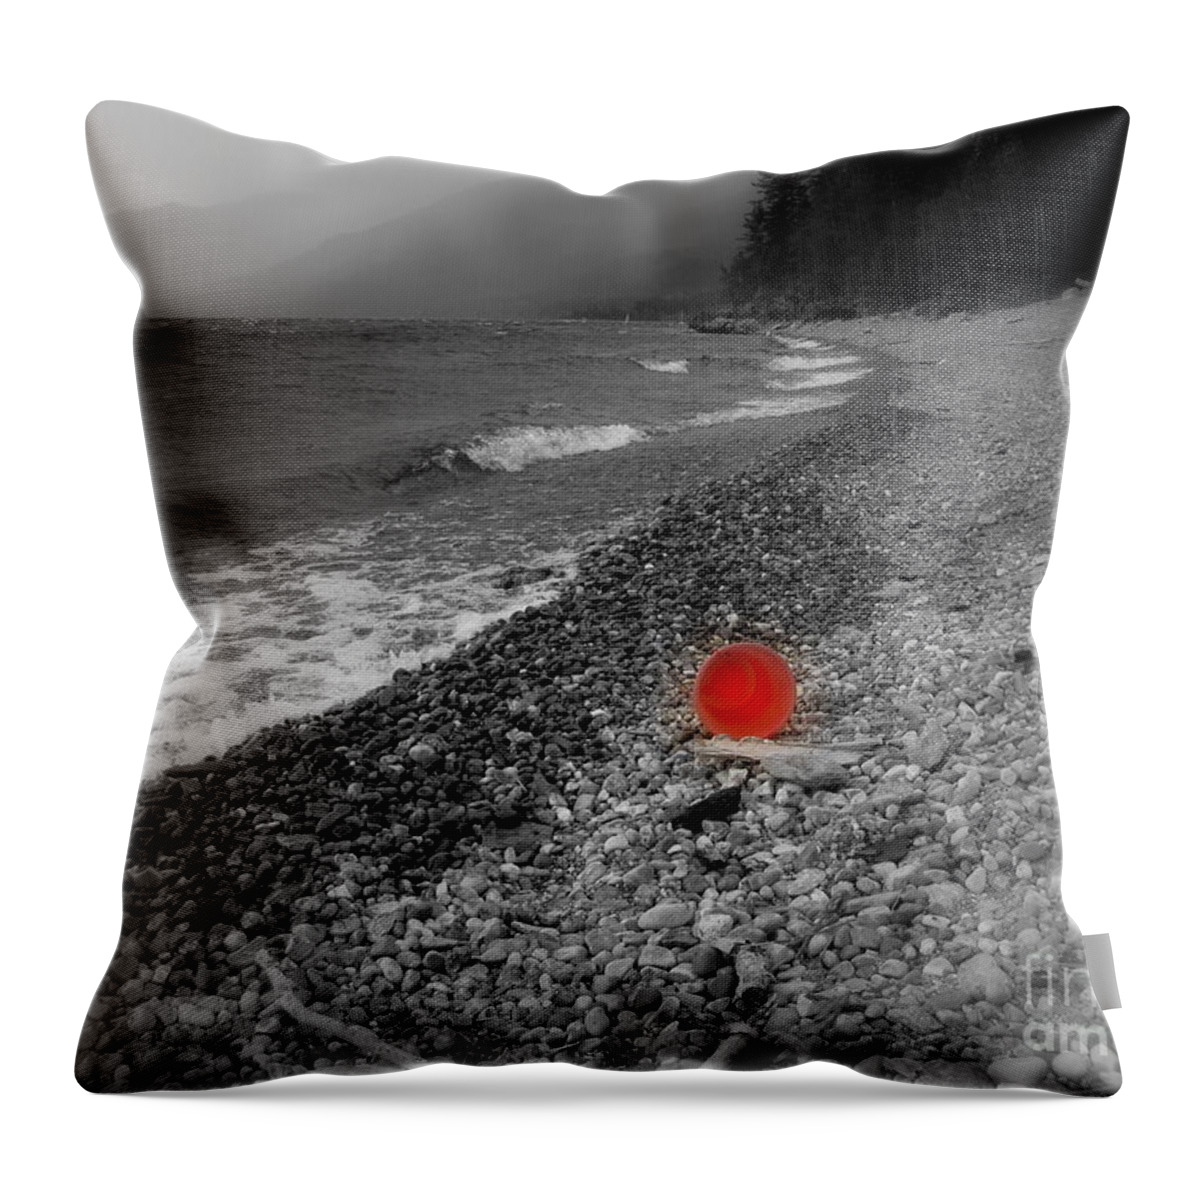 Red Throw Pillow featuring the photograph Red Pail by Leone Lund